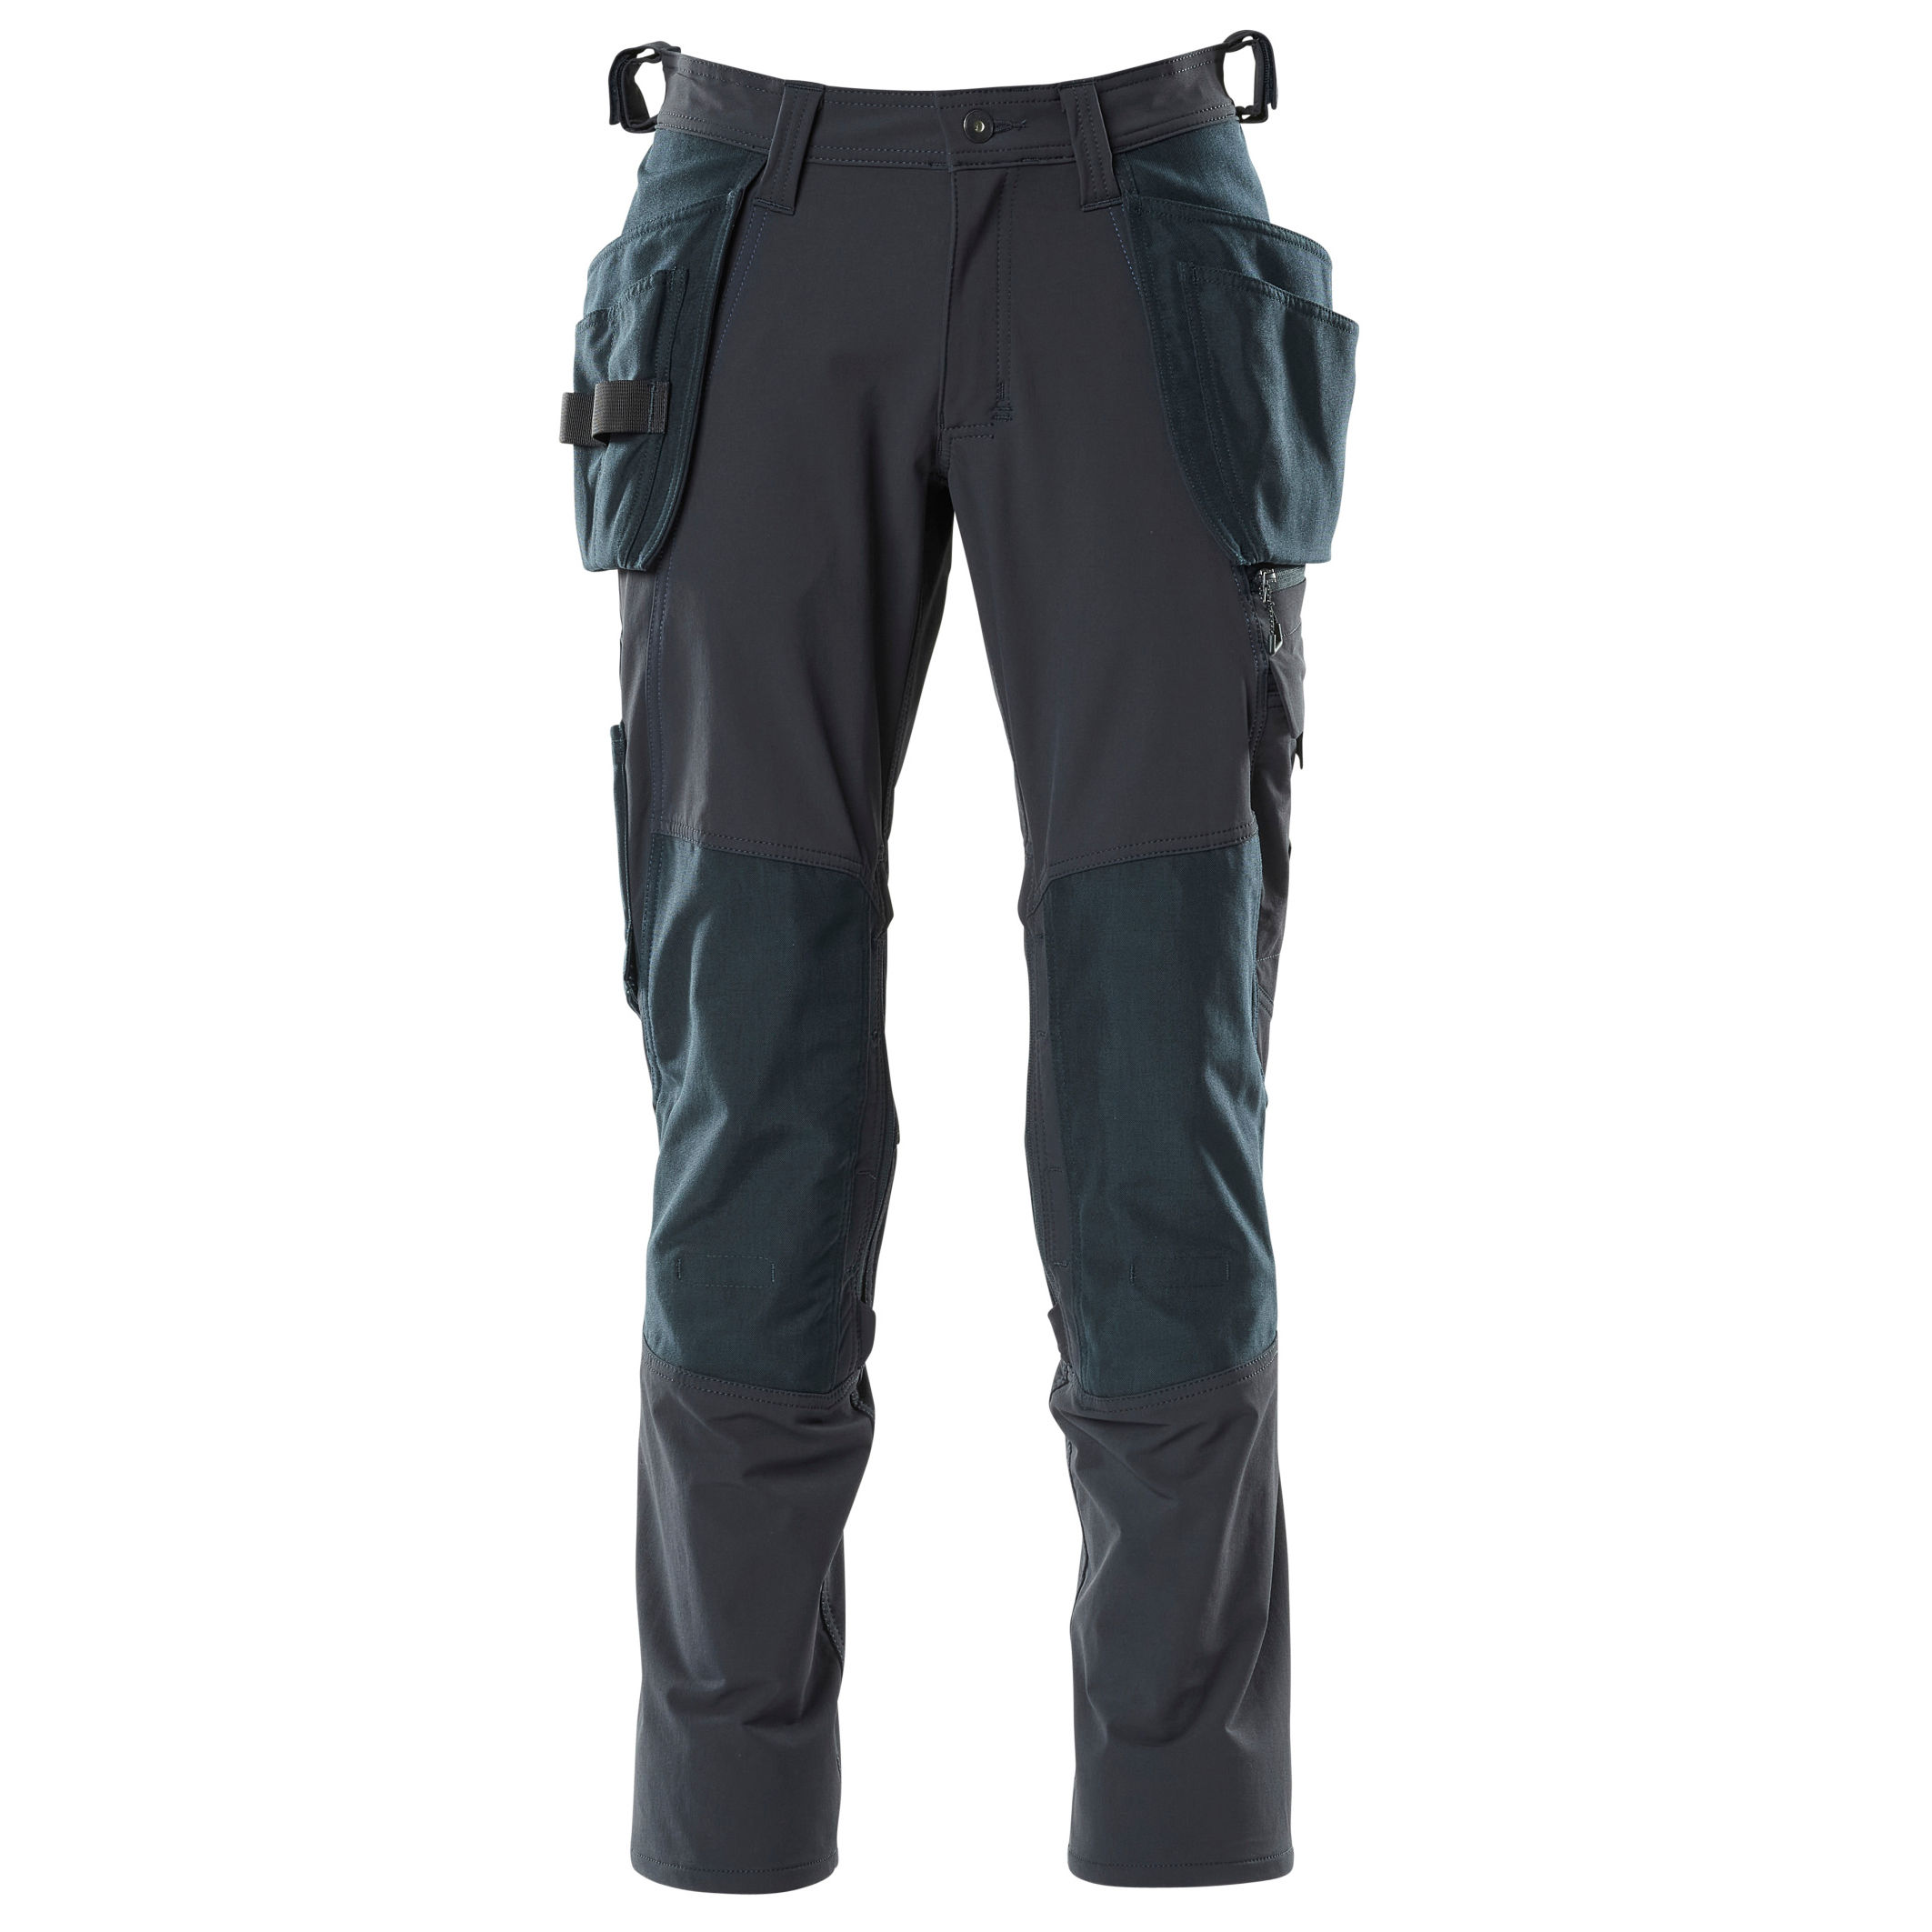 Mascot Lightweight Accelerate Trousers With Holster Pockets - Navy